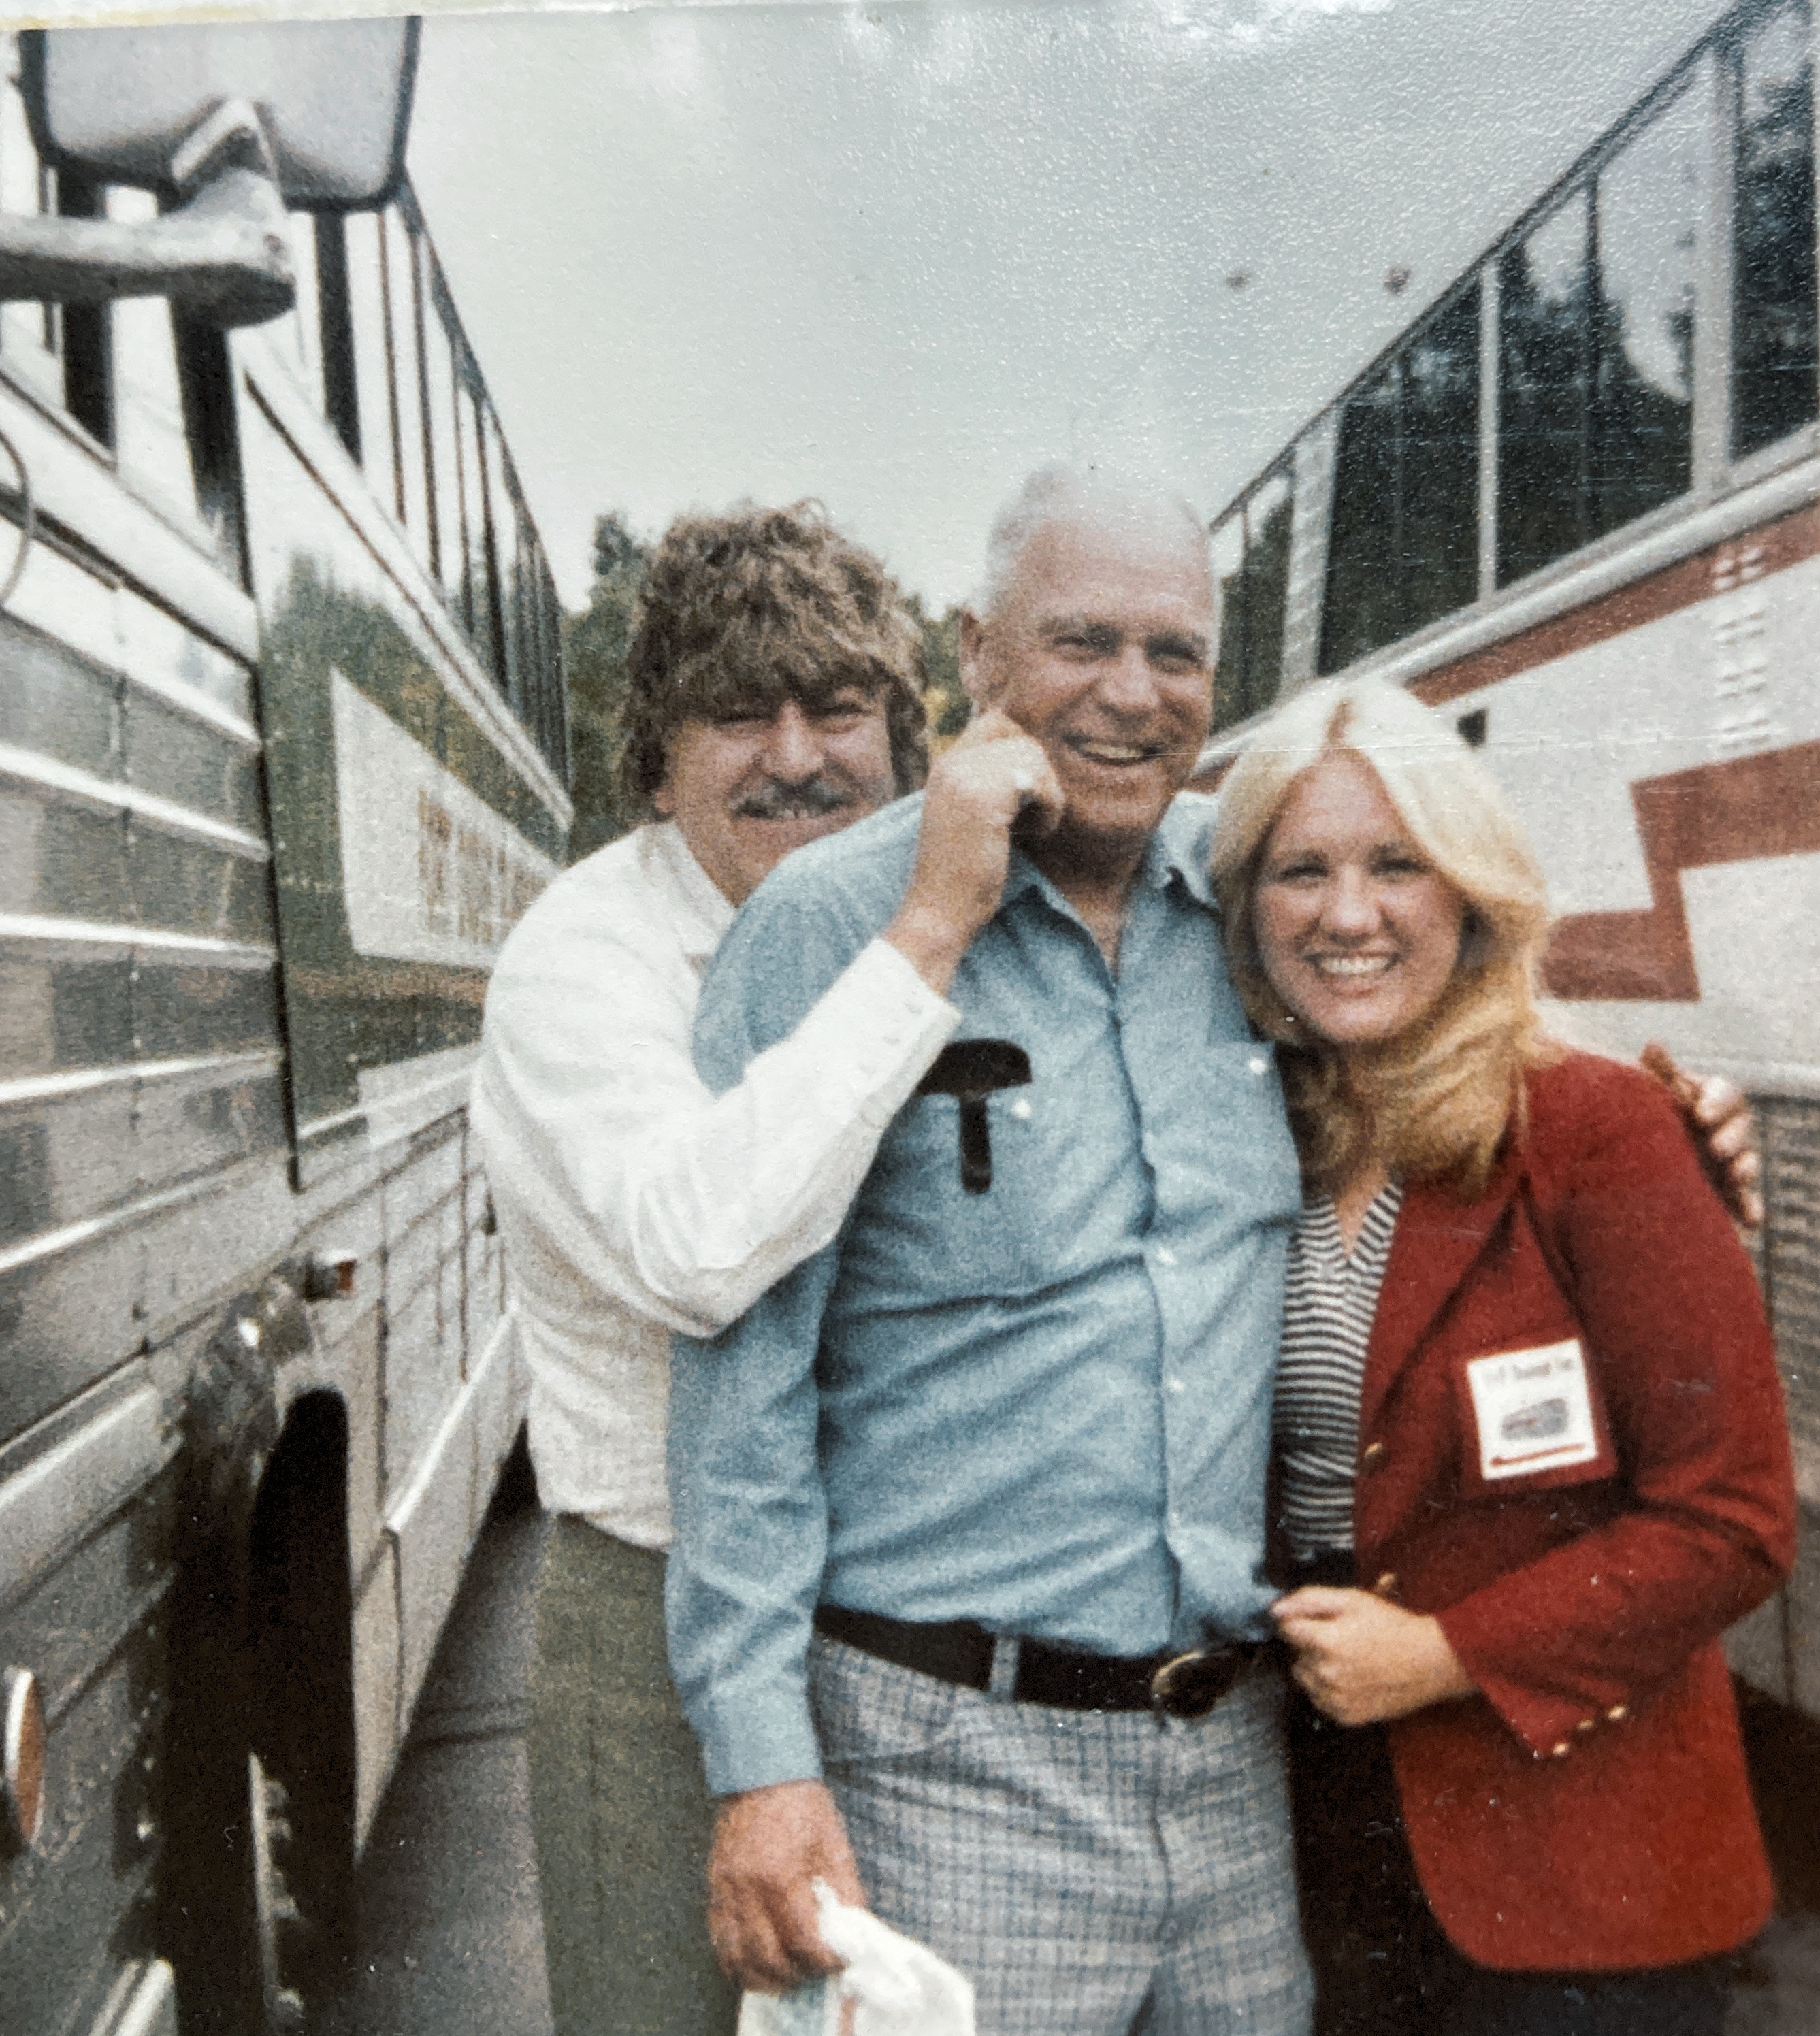 Herald Scofield hamming it up with bus driver and tour guide from a senior citizen trip. 1979.